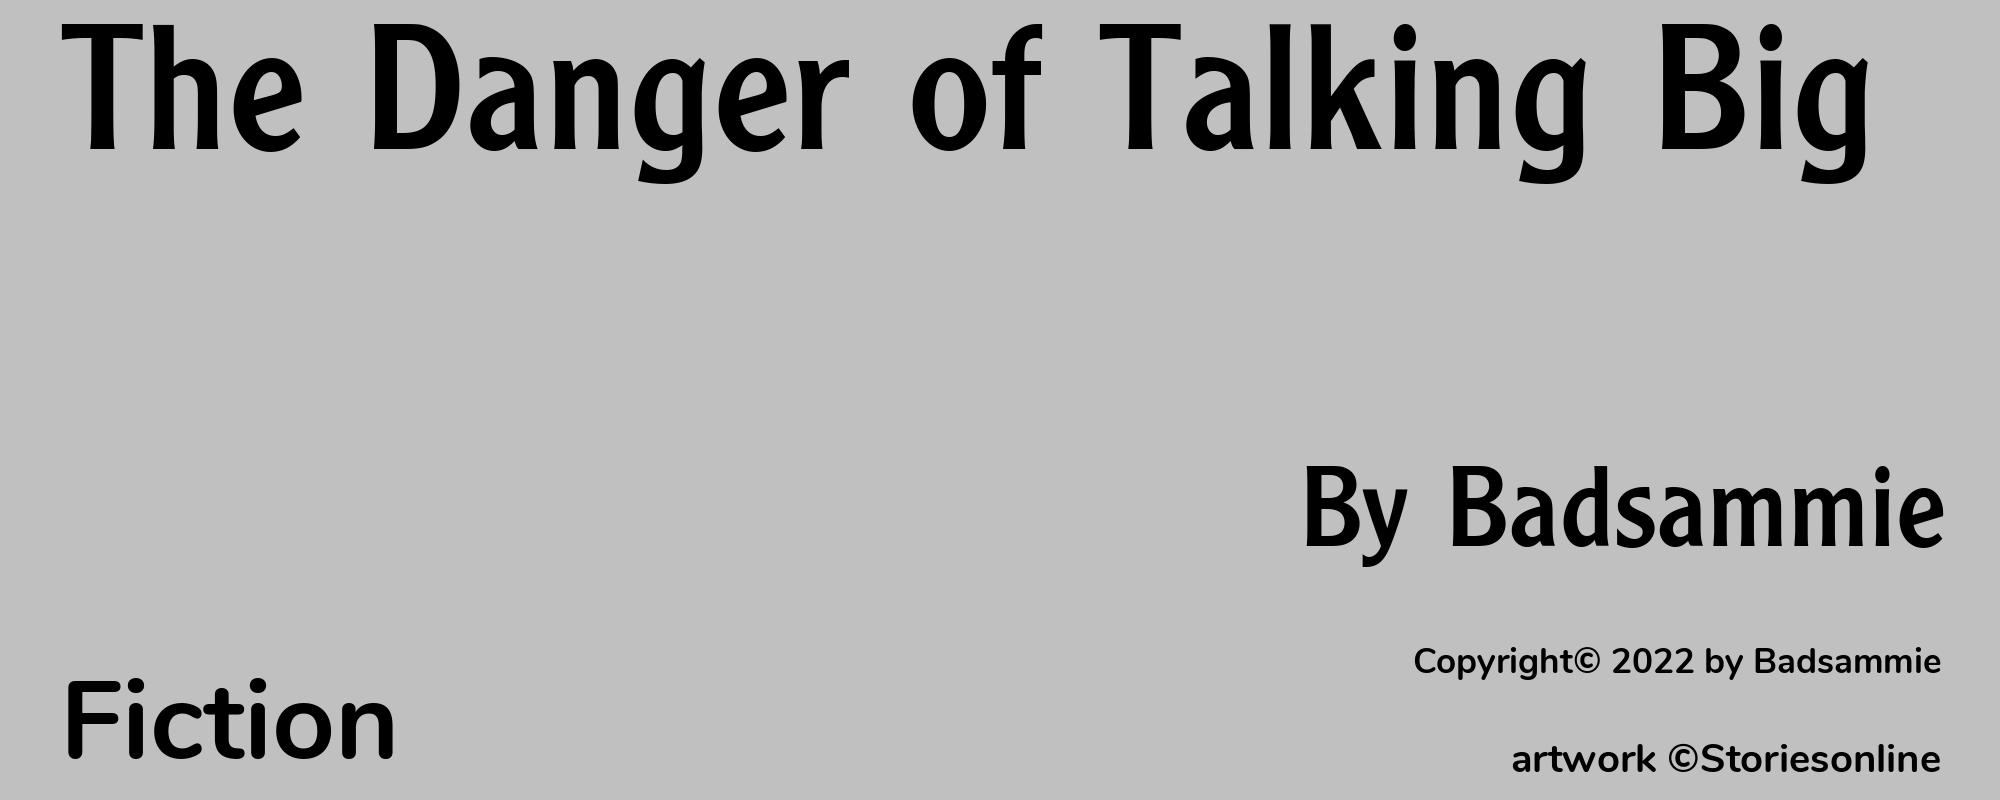 The Danger of Talking Big - Cover